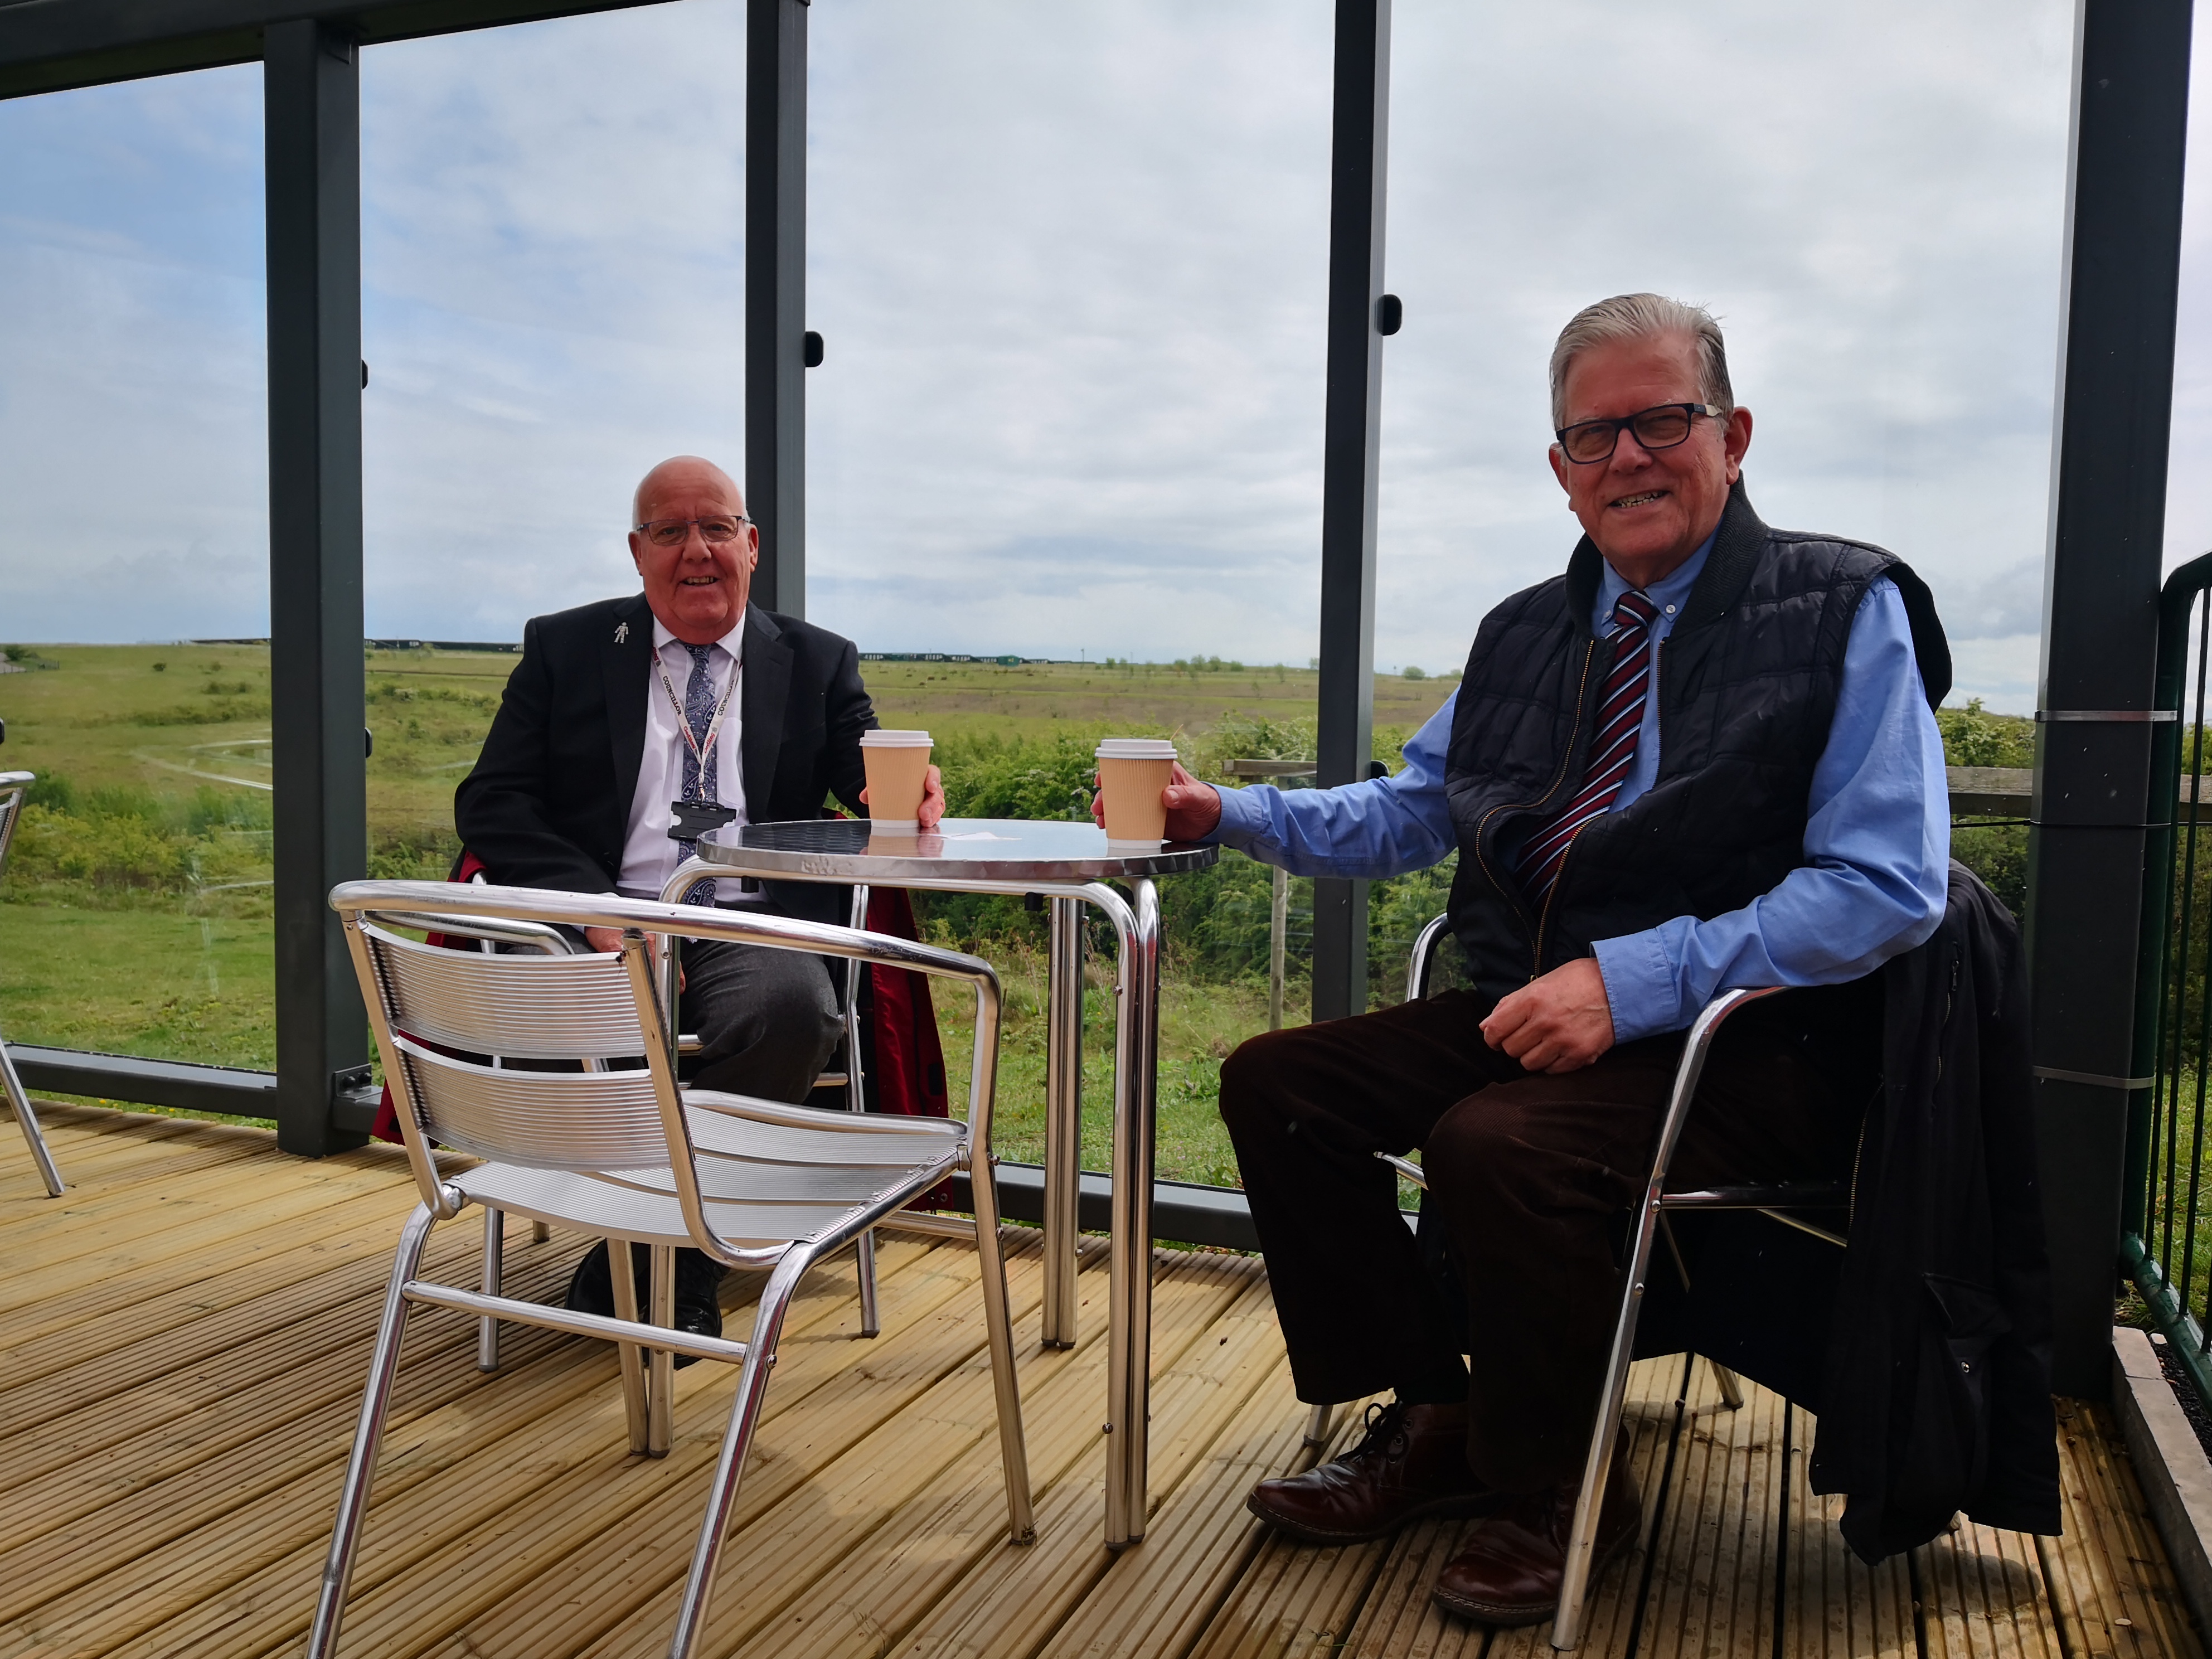 Councillor Gary Gregory and Councillor John Clarke sat at the outdoor seating area for Cafe1899 at Gedling Country Park